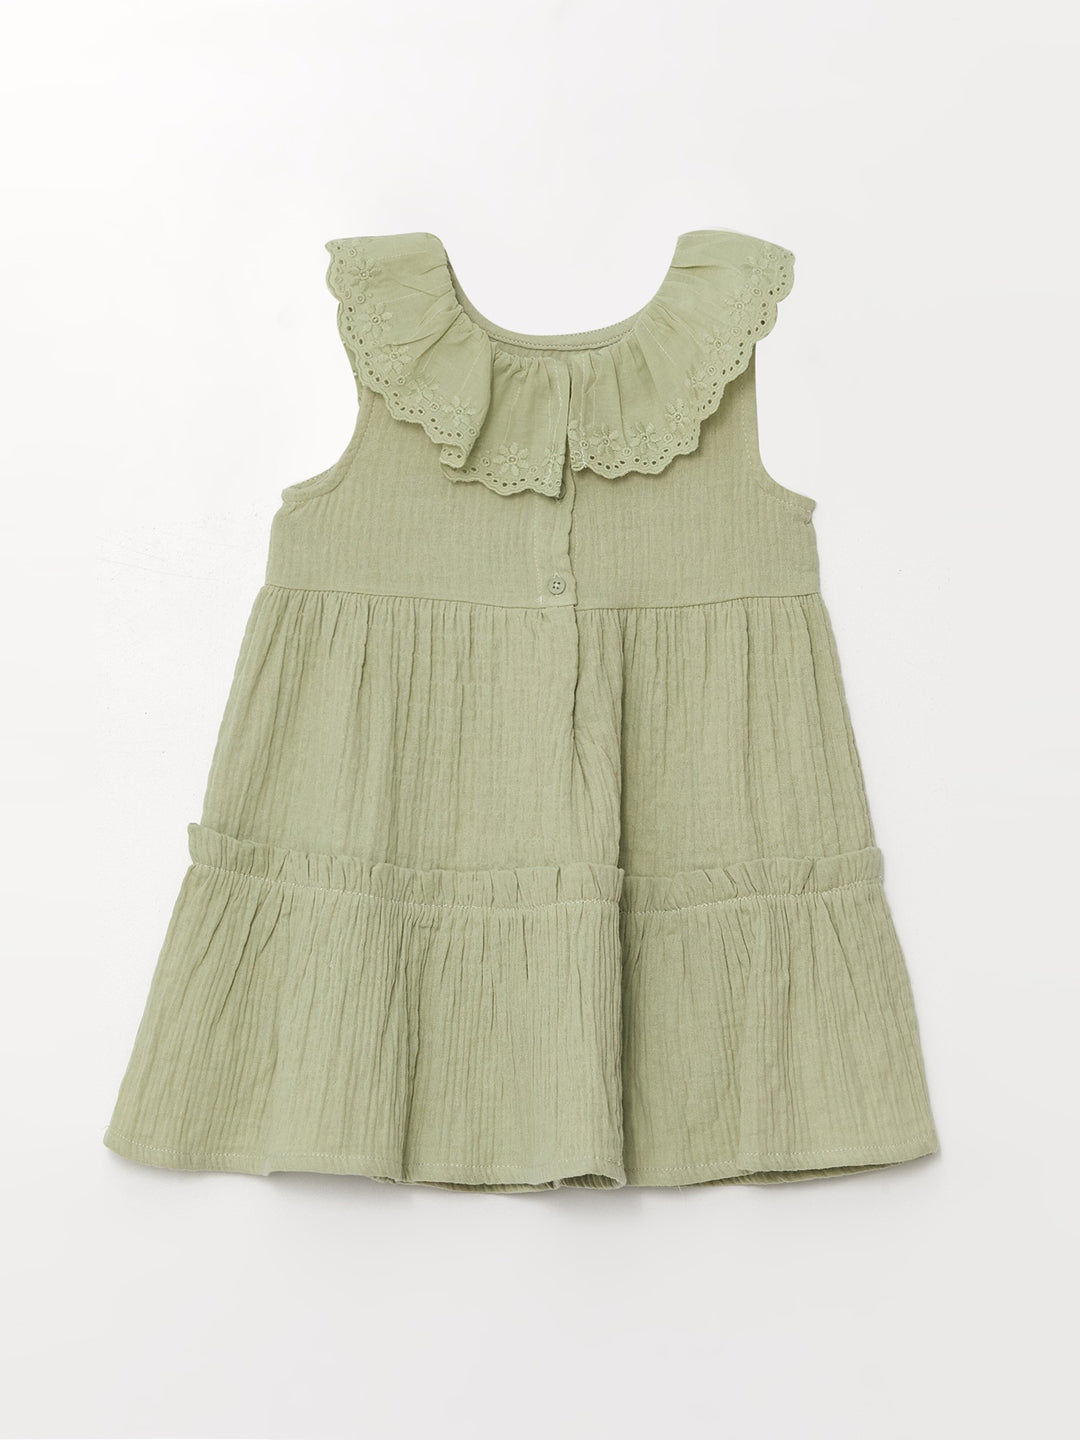 Crew Neck Short Sleeve Embroidered Baby Girl Dress